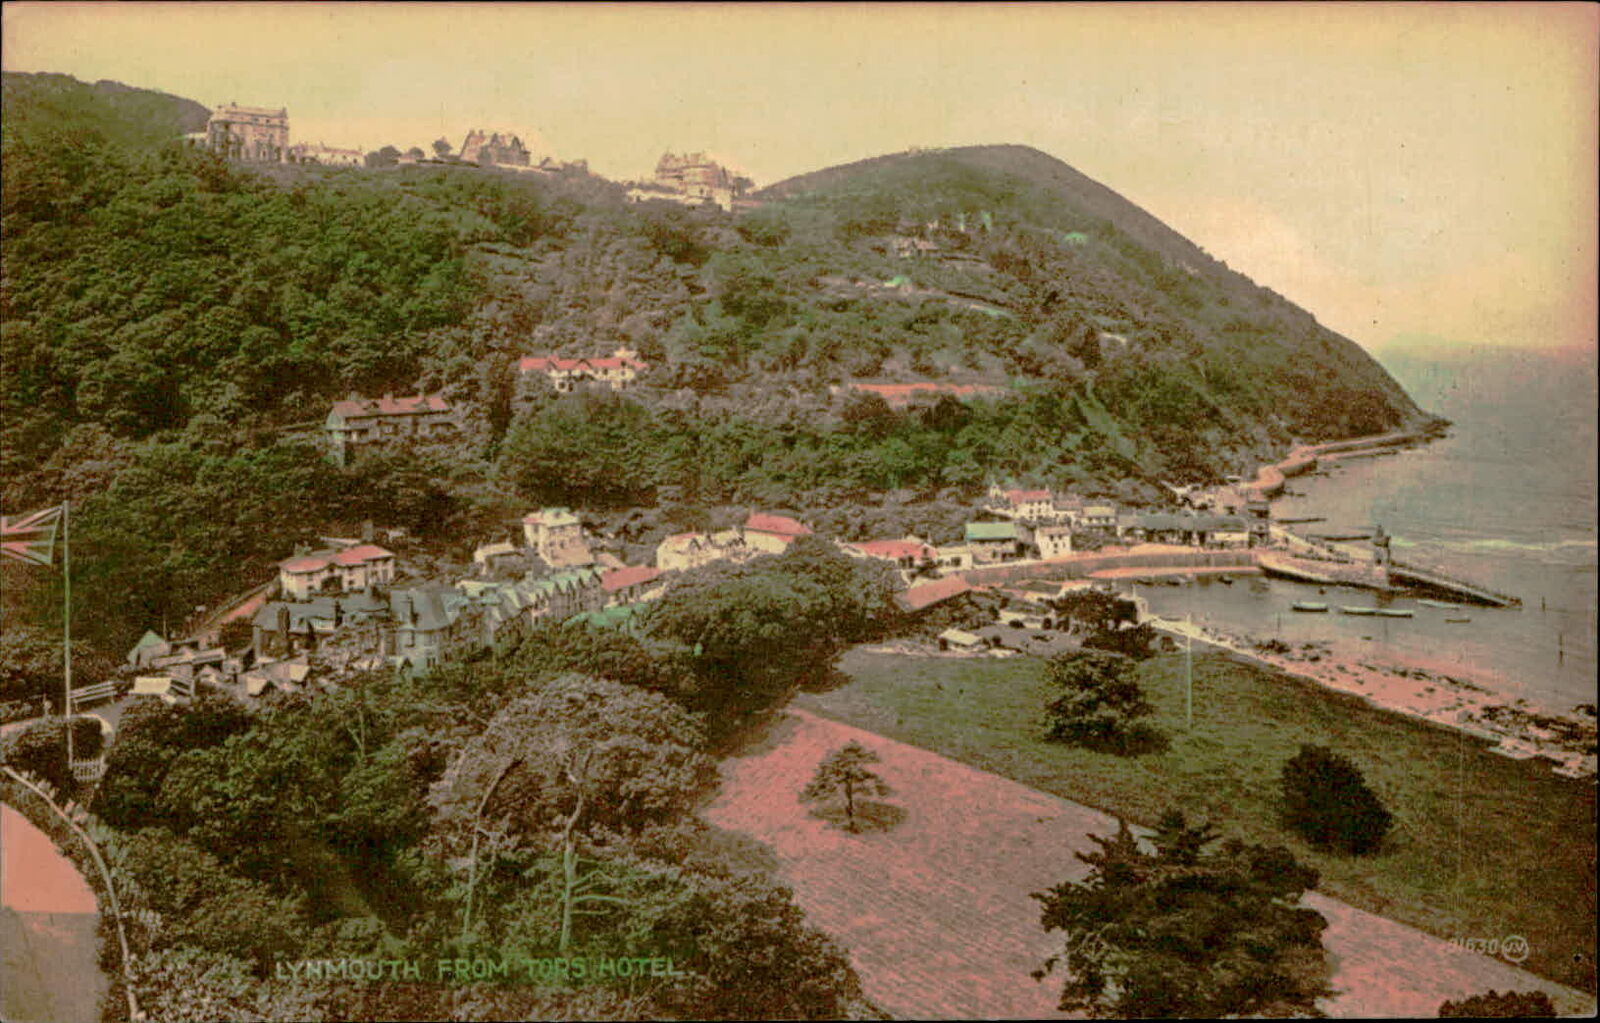 Postcard: F LYNMOUTH FROM TORS HOTEL.